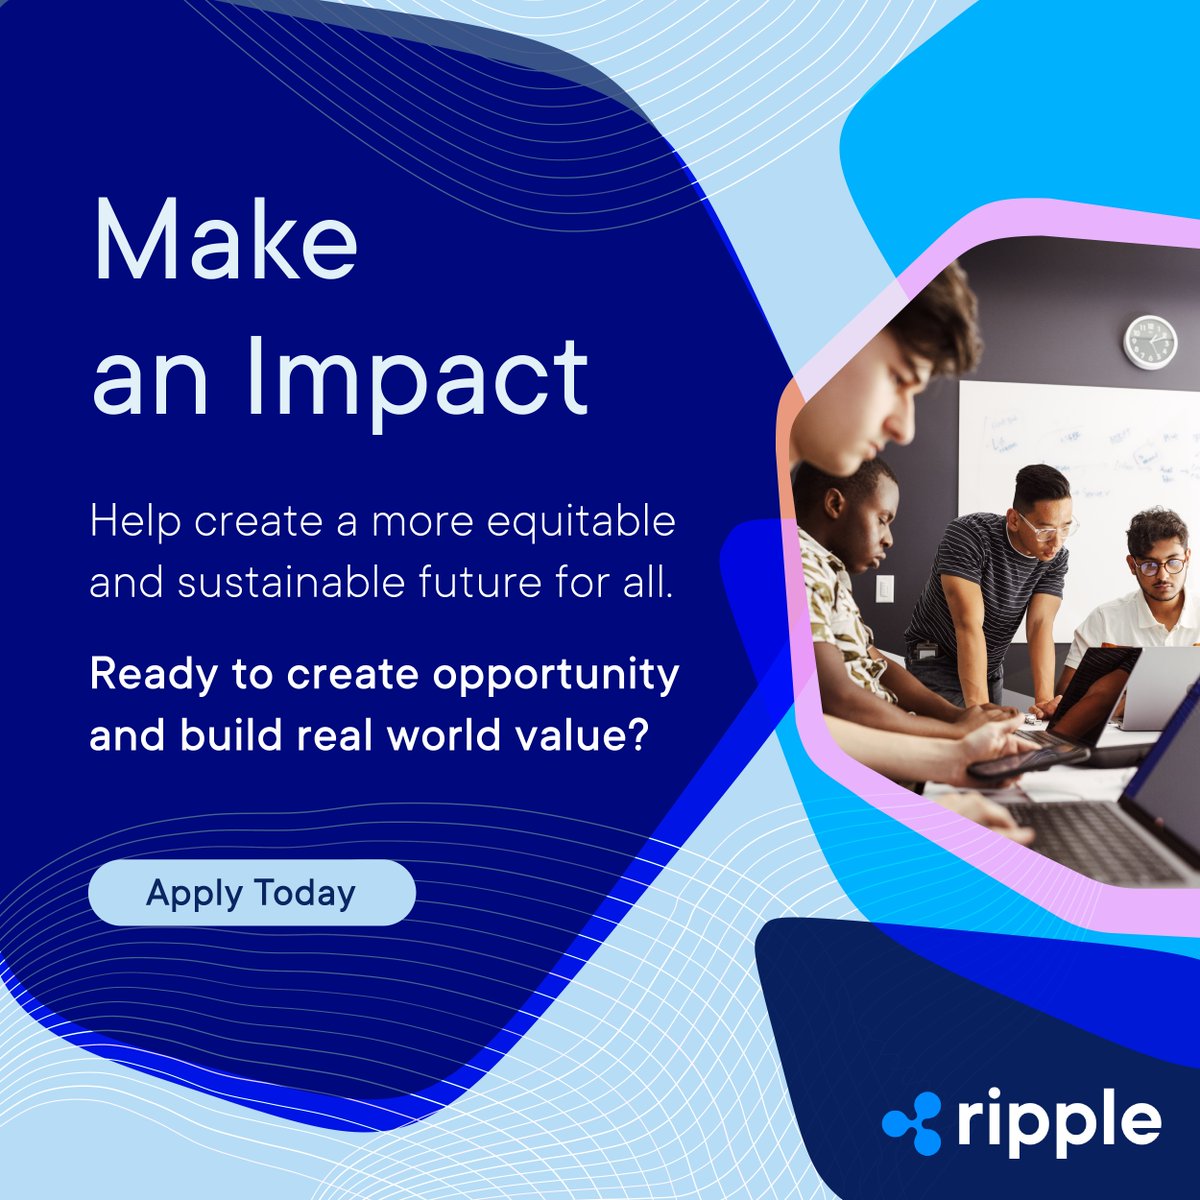 Ready to make an impact with us as we transform the future of finance? ⭐️ Explore our latest job openings: on.ripple.com/careers 👉 Senior Manager, Business Development (Institutional DeFi) 👉 Senior IT Auditor, Internal Audit 👉 Staff Performance Engineer